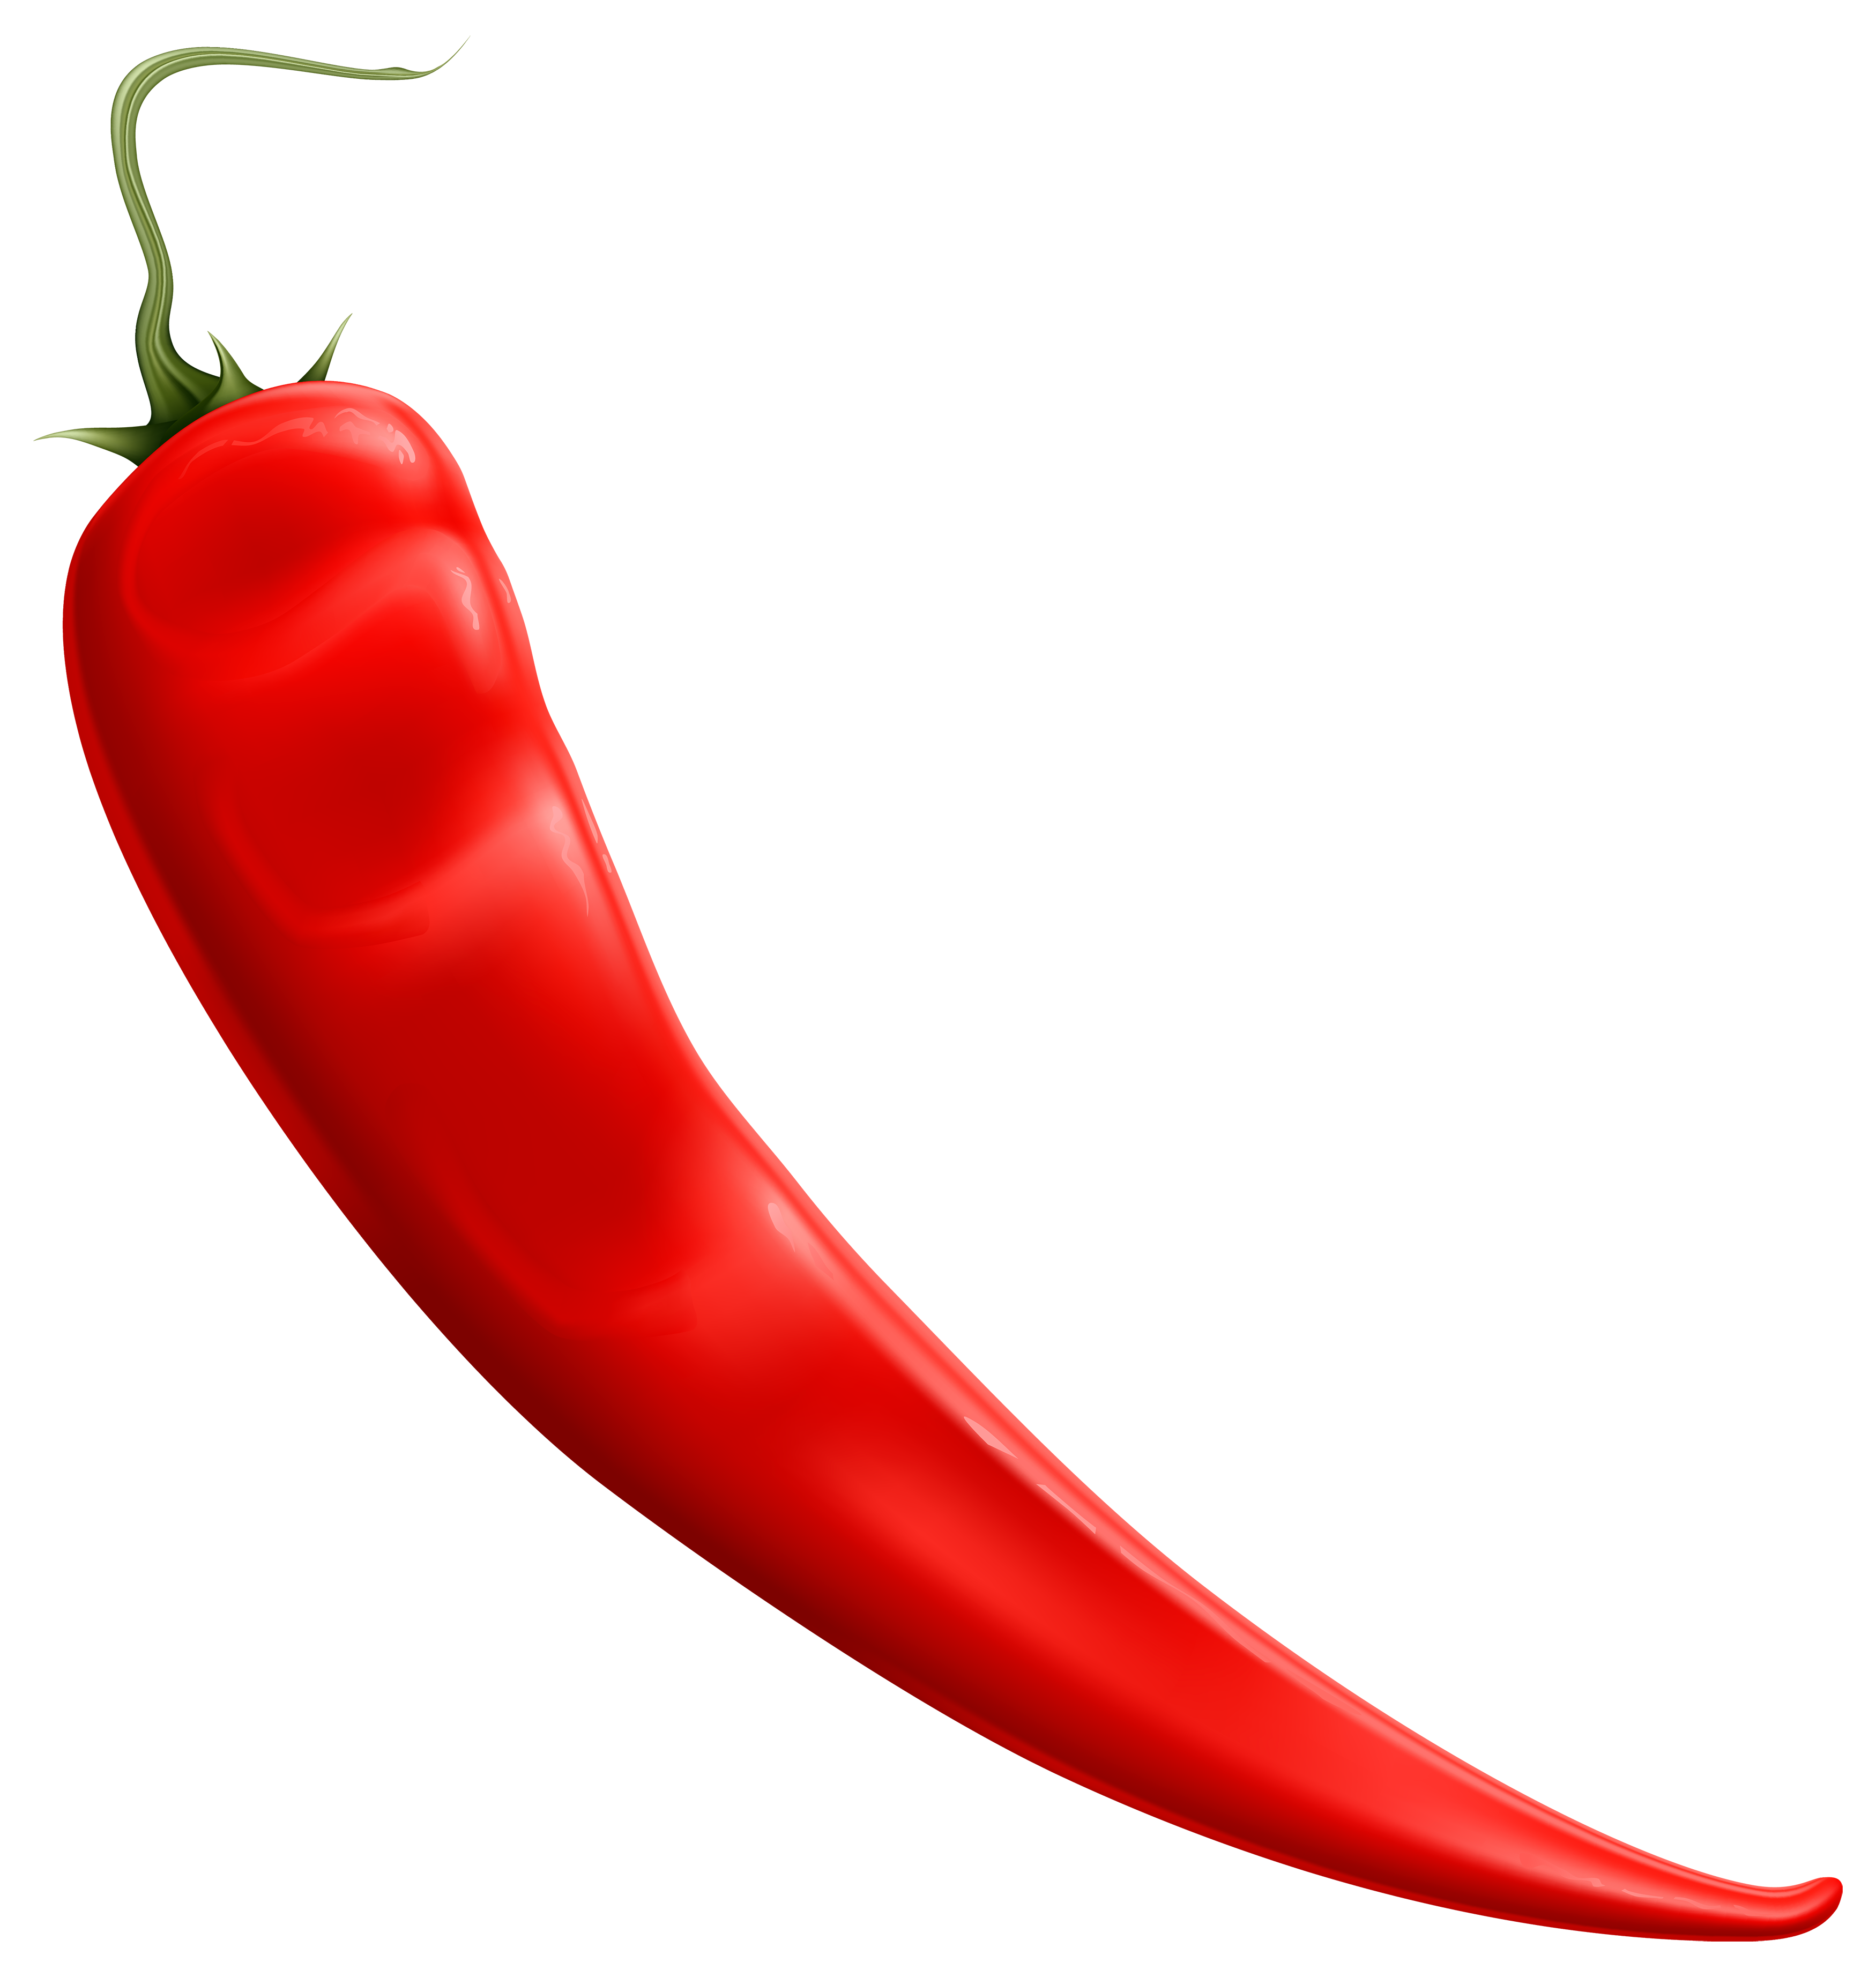 Red chili pepper clip art free vector in open office drawing svg ...